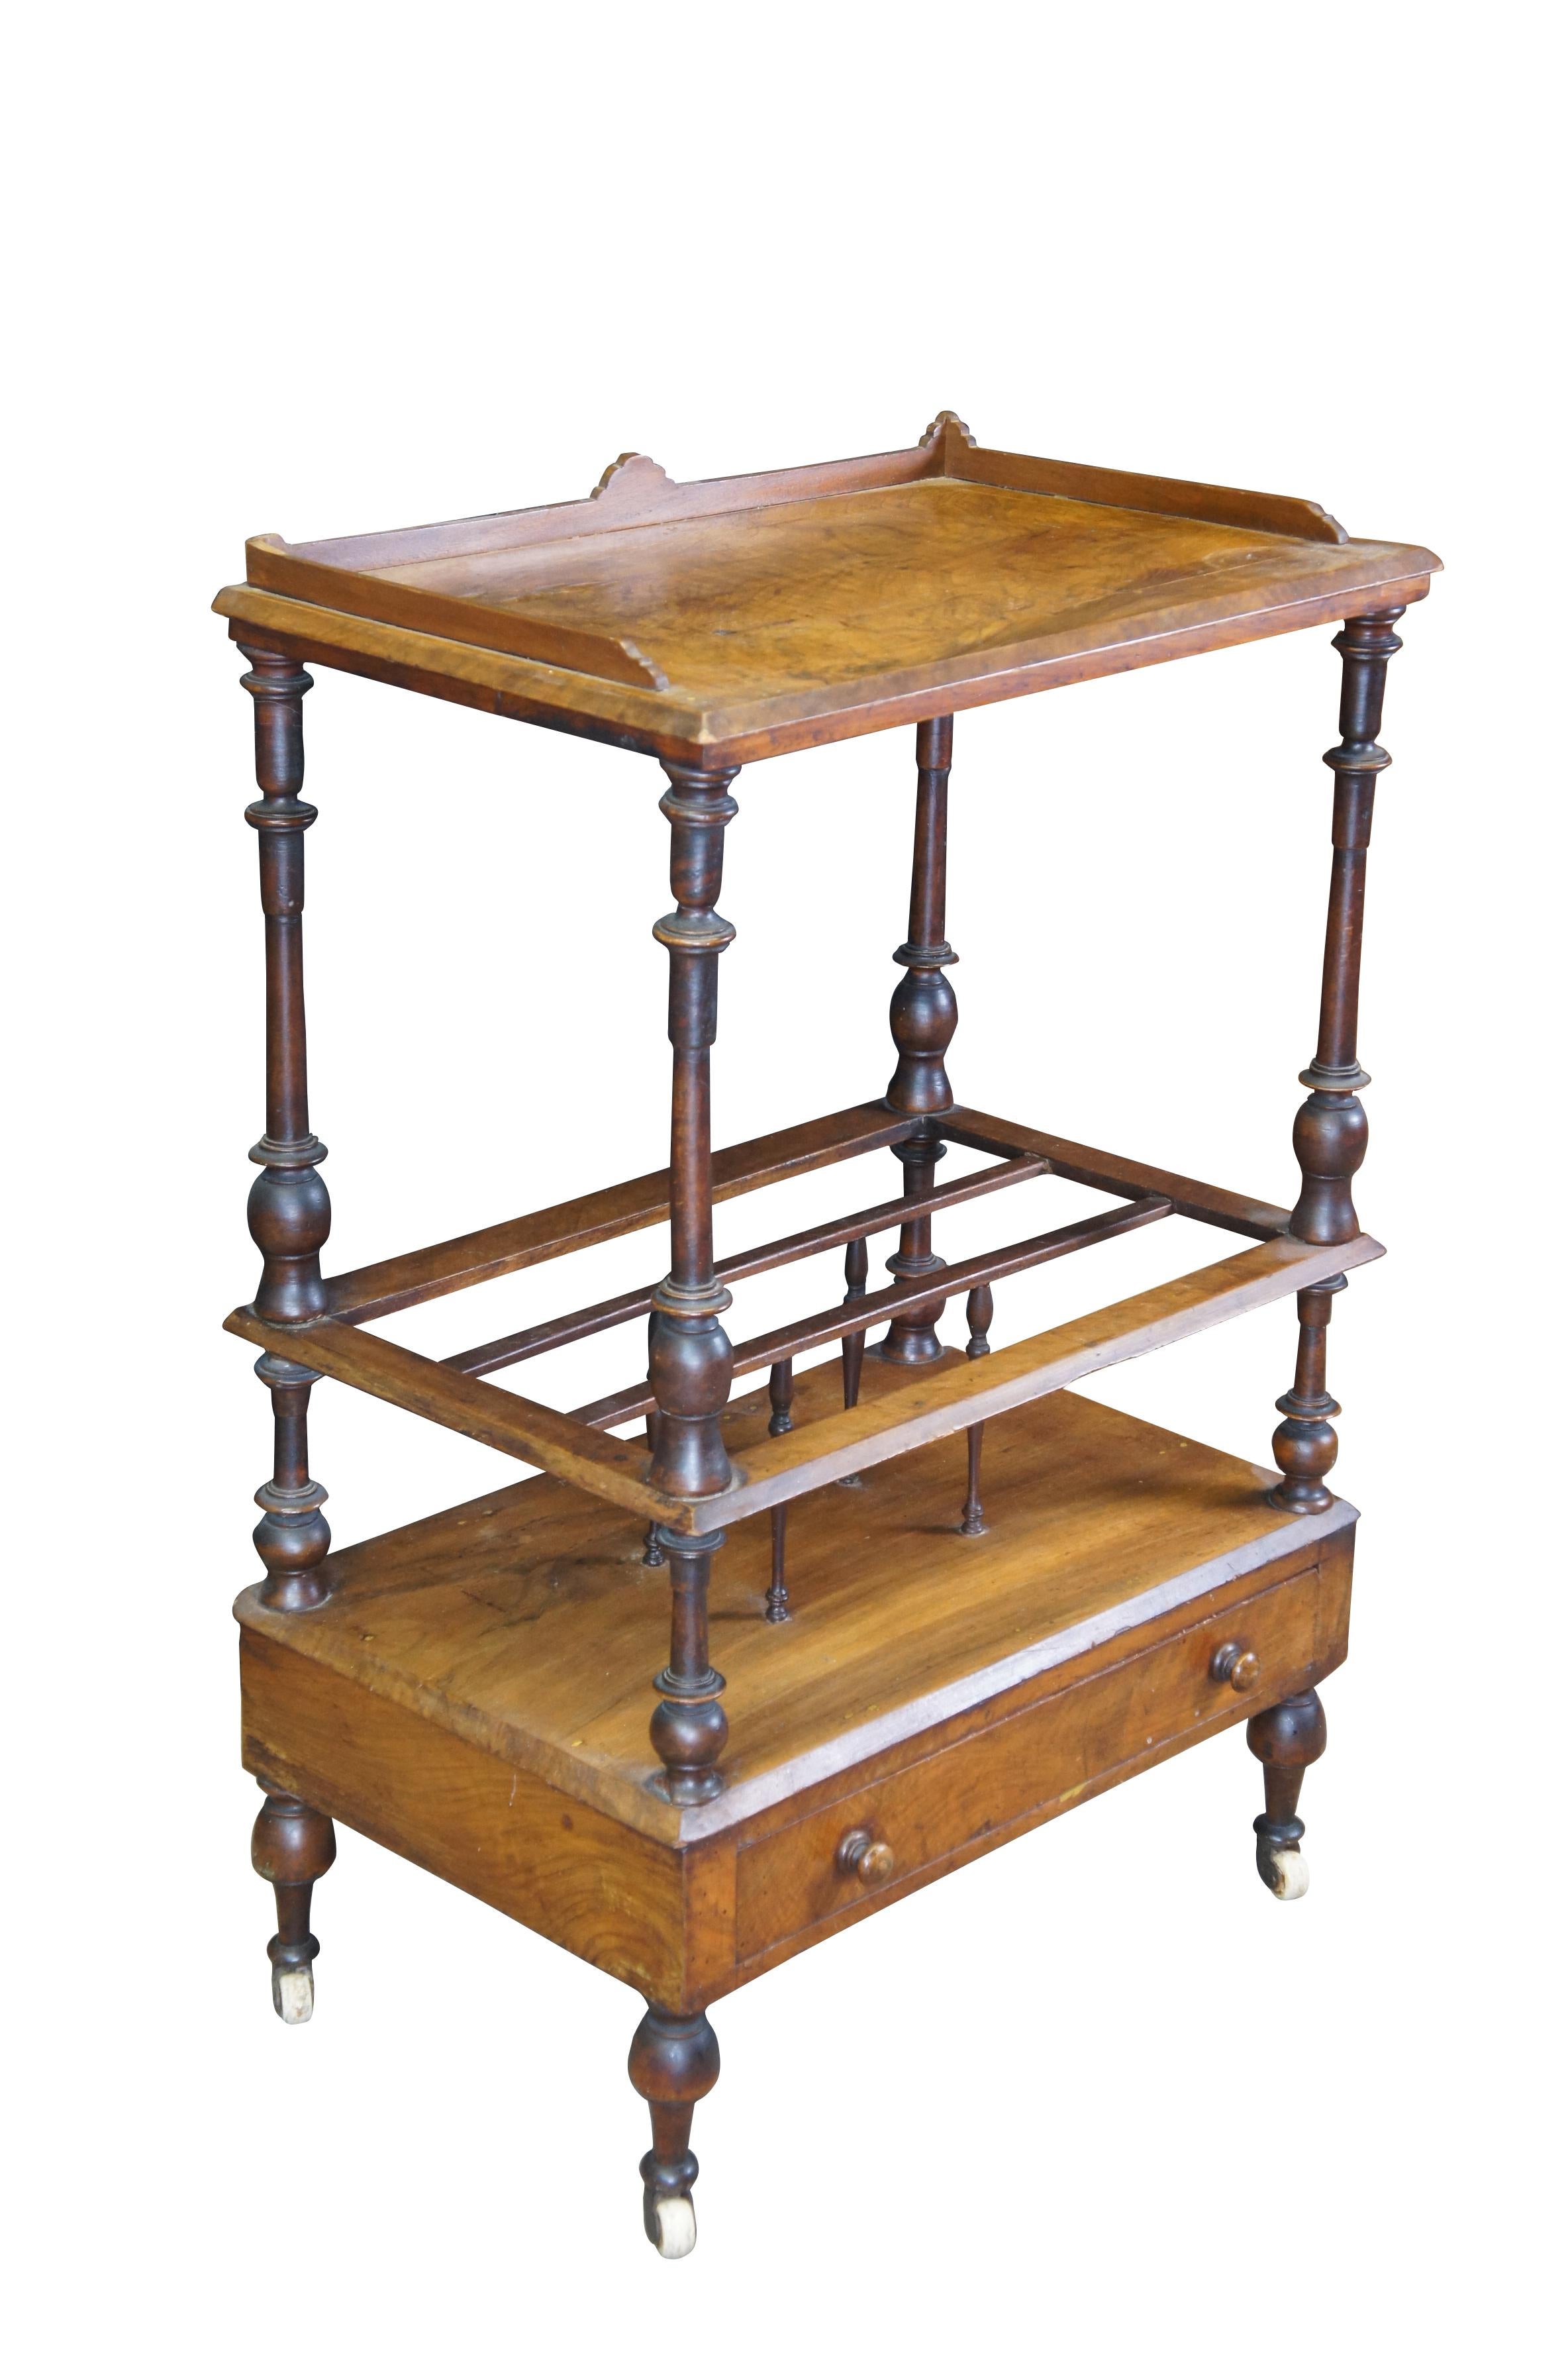 Antique Victorian walnut Canterbury rack / cart.  Made of walnut featuring fruitwood inlay and gallery, supported on finely turned columns, the middle section having three divisions which are divided with turned spindles, with a nice moulded edge